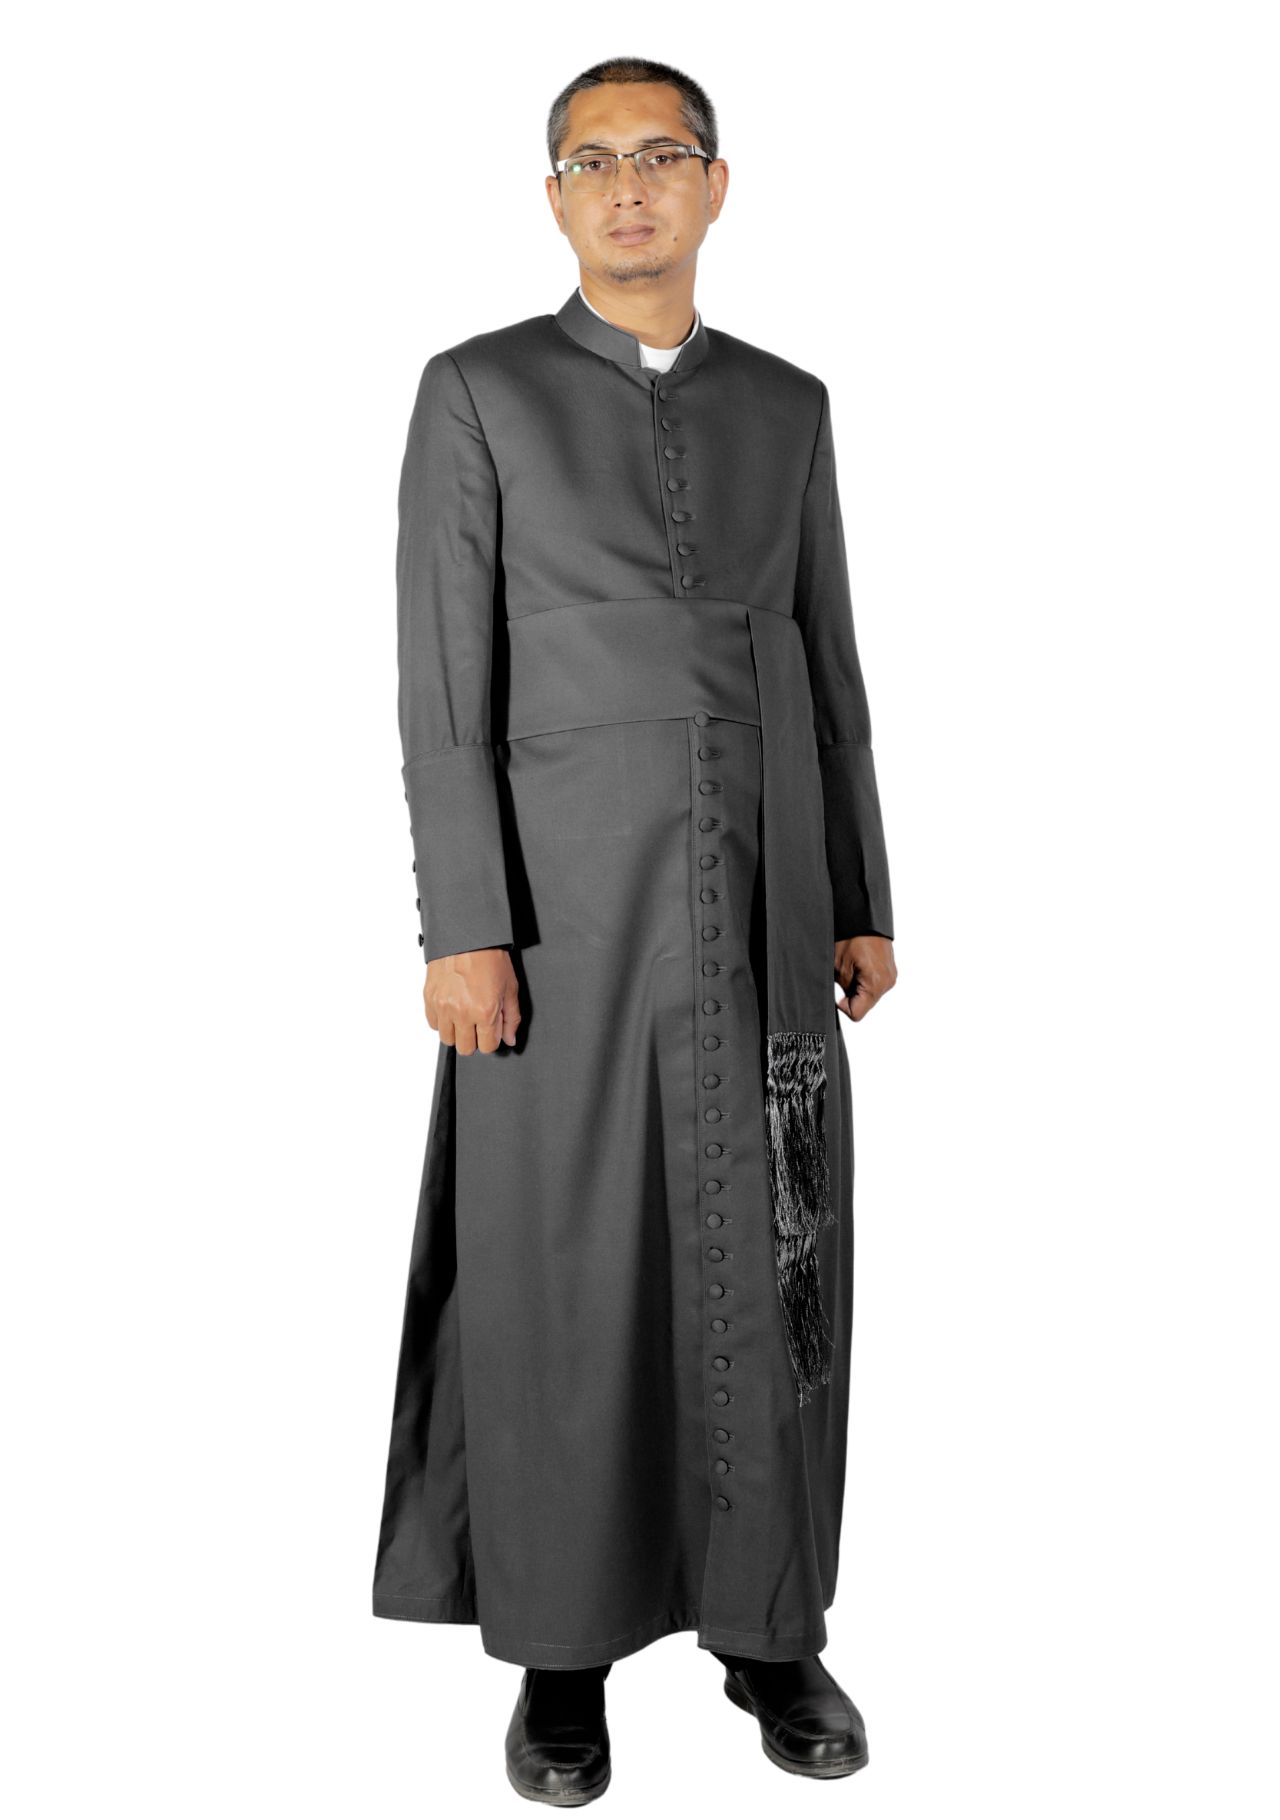 Catholic Priest Clothes are the Vestments of Faith